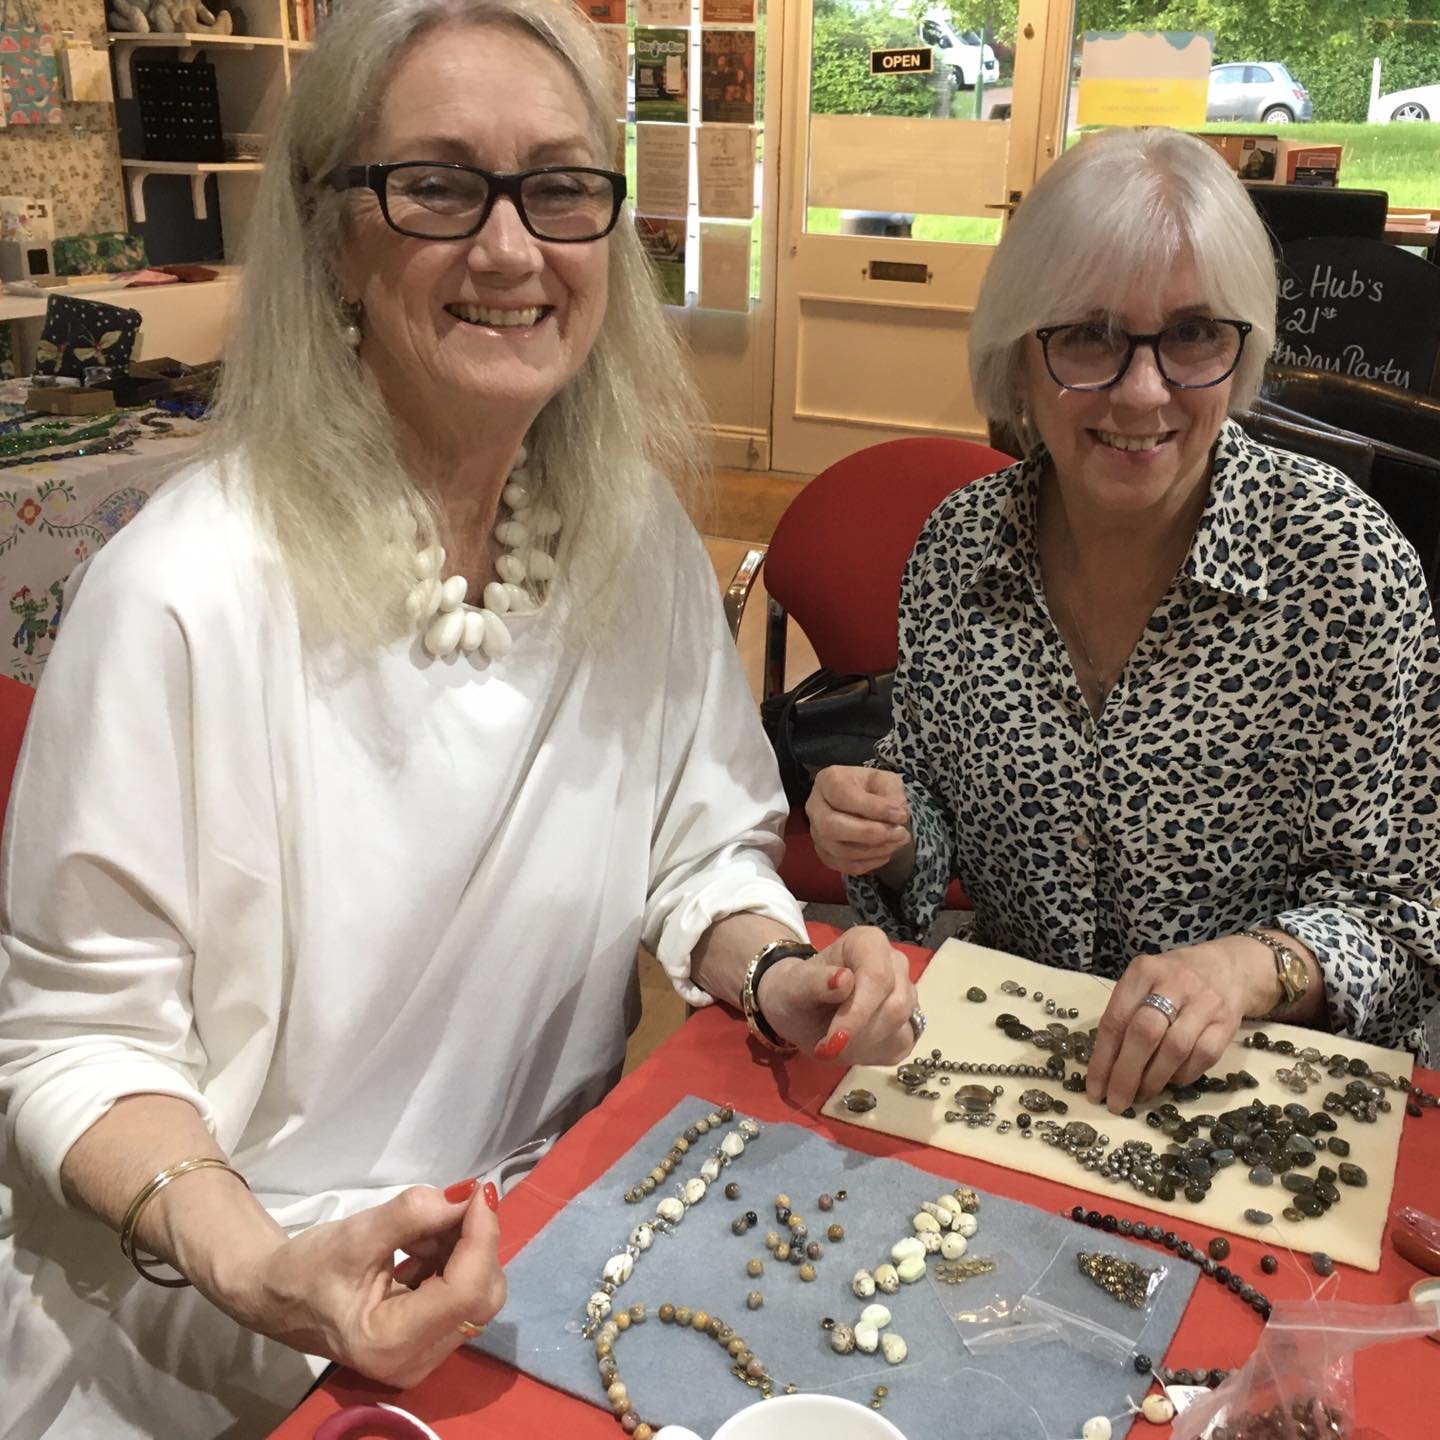 Huge thanks to Catriona Godson who led a fabulous  jewellery making workshop in The Fernhurst Hub.  Catriona bought a wonderful selection of semi precious stones and under her watchful eye all the ladies created their own beautiful, bespoke necklaces